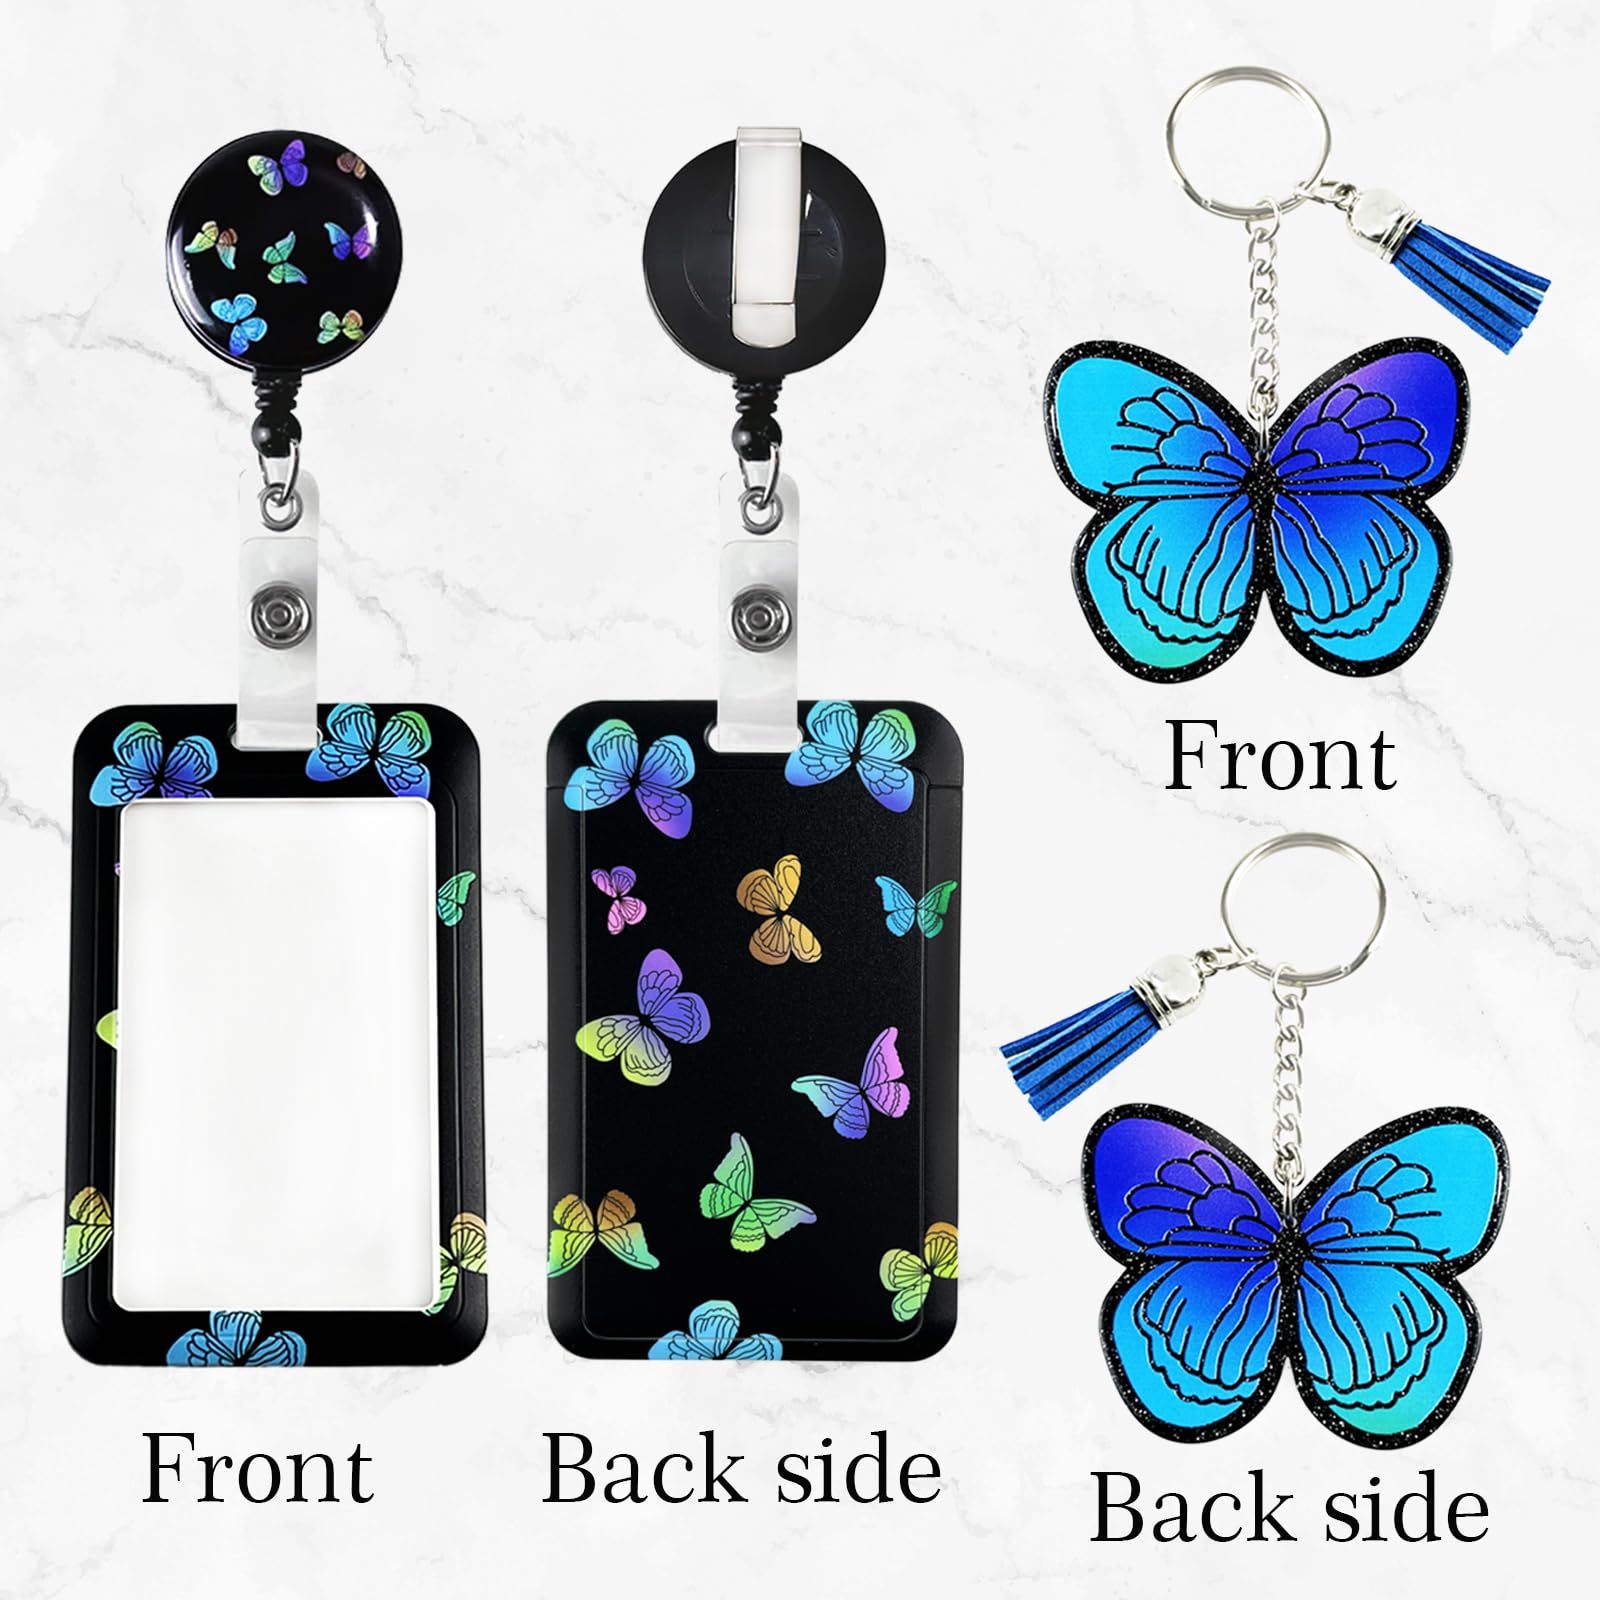 ID Badge Holder with Lanyard Retractable Badge Reel Clip Lanyards for ID Badges Butterfly Color Lanyards for ID Badges Lanyards for Women Butterfly Acrylic Keychain Teacher Lanyards Nurse Badge